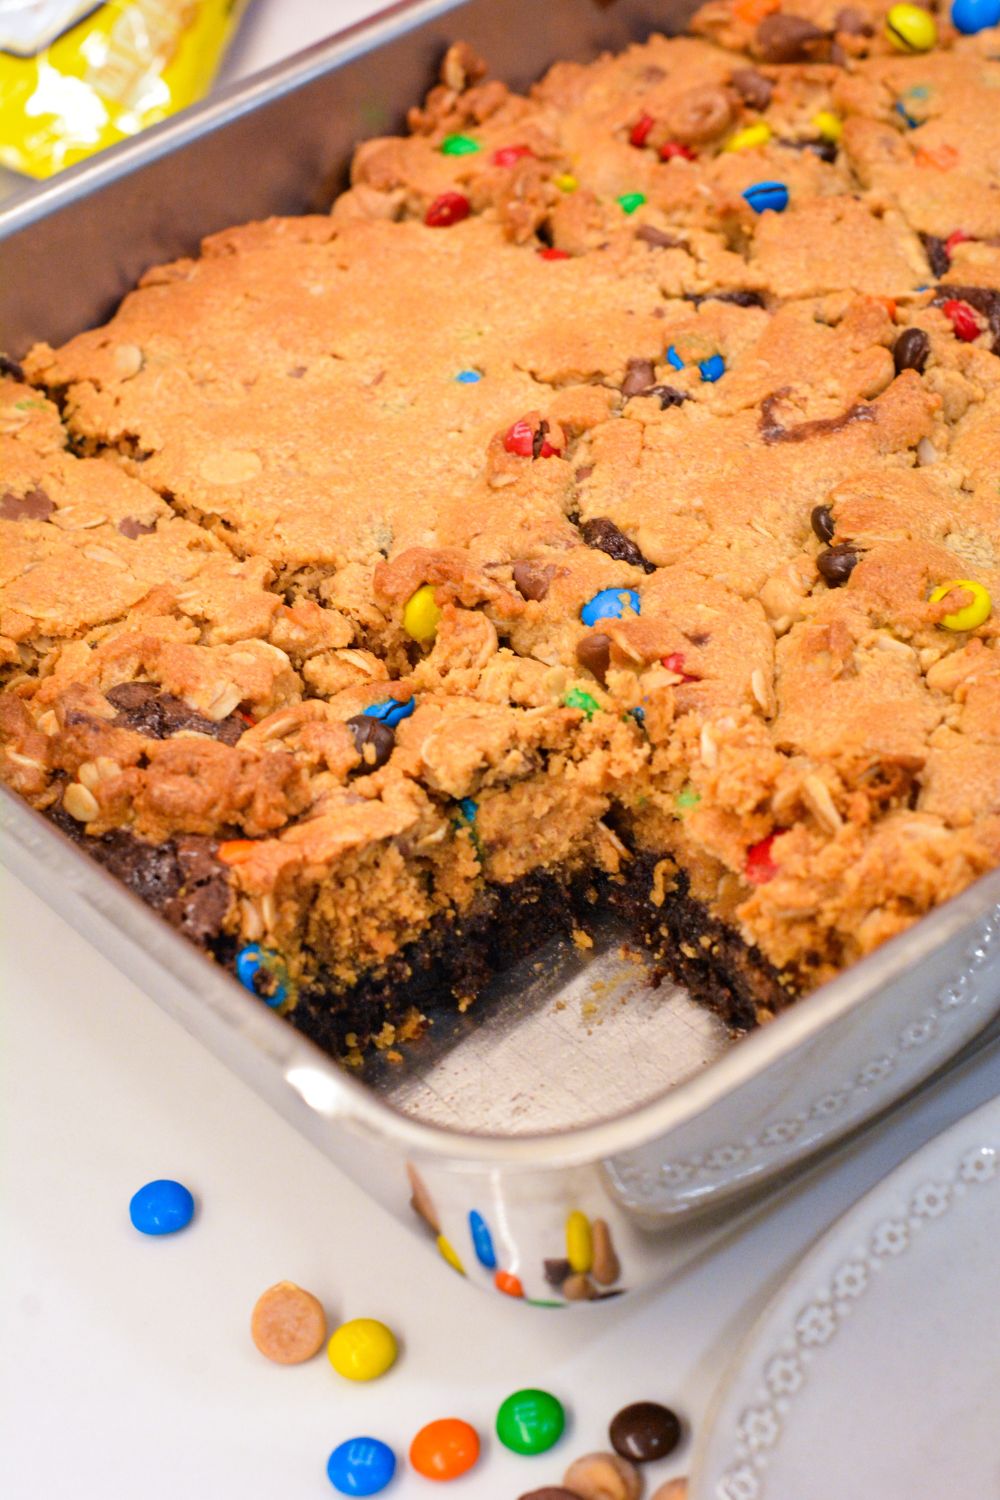 Fudgy brownies monster cookie bars combine a brownie mix with a peanut butter cookie dough mix with the addition of oatmeal, peanut butter, chocolate chips, m&m's and peanut butter chips.